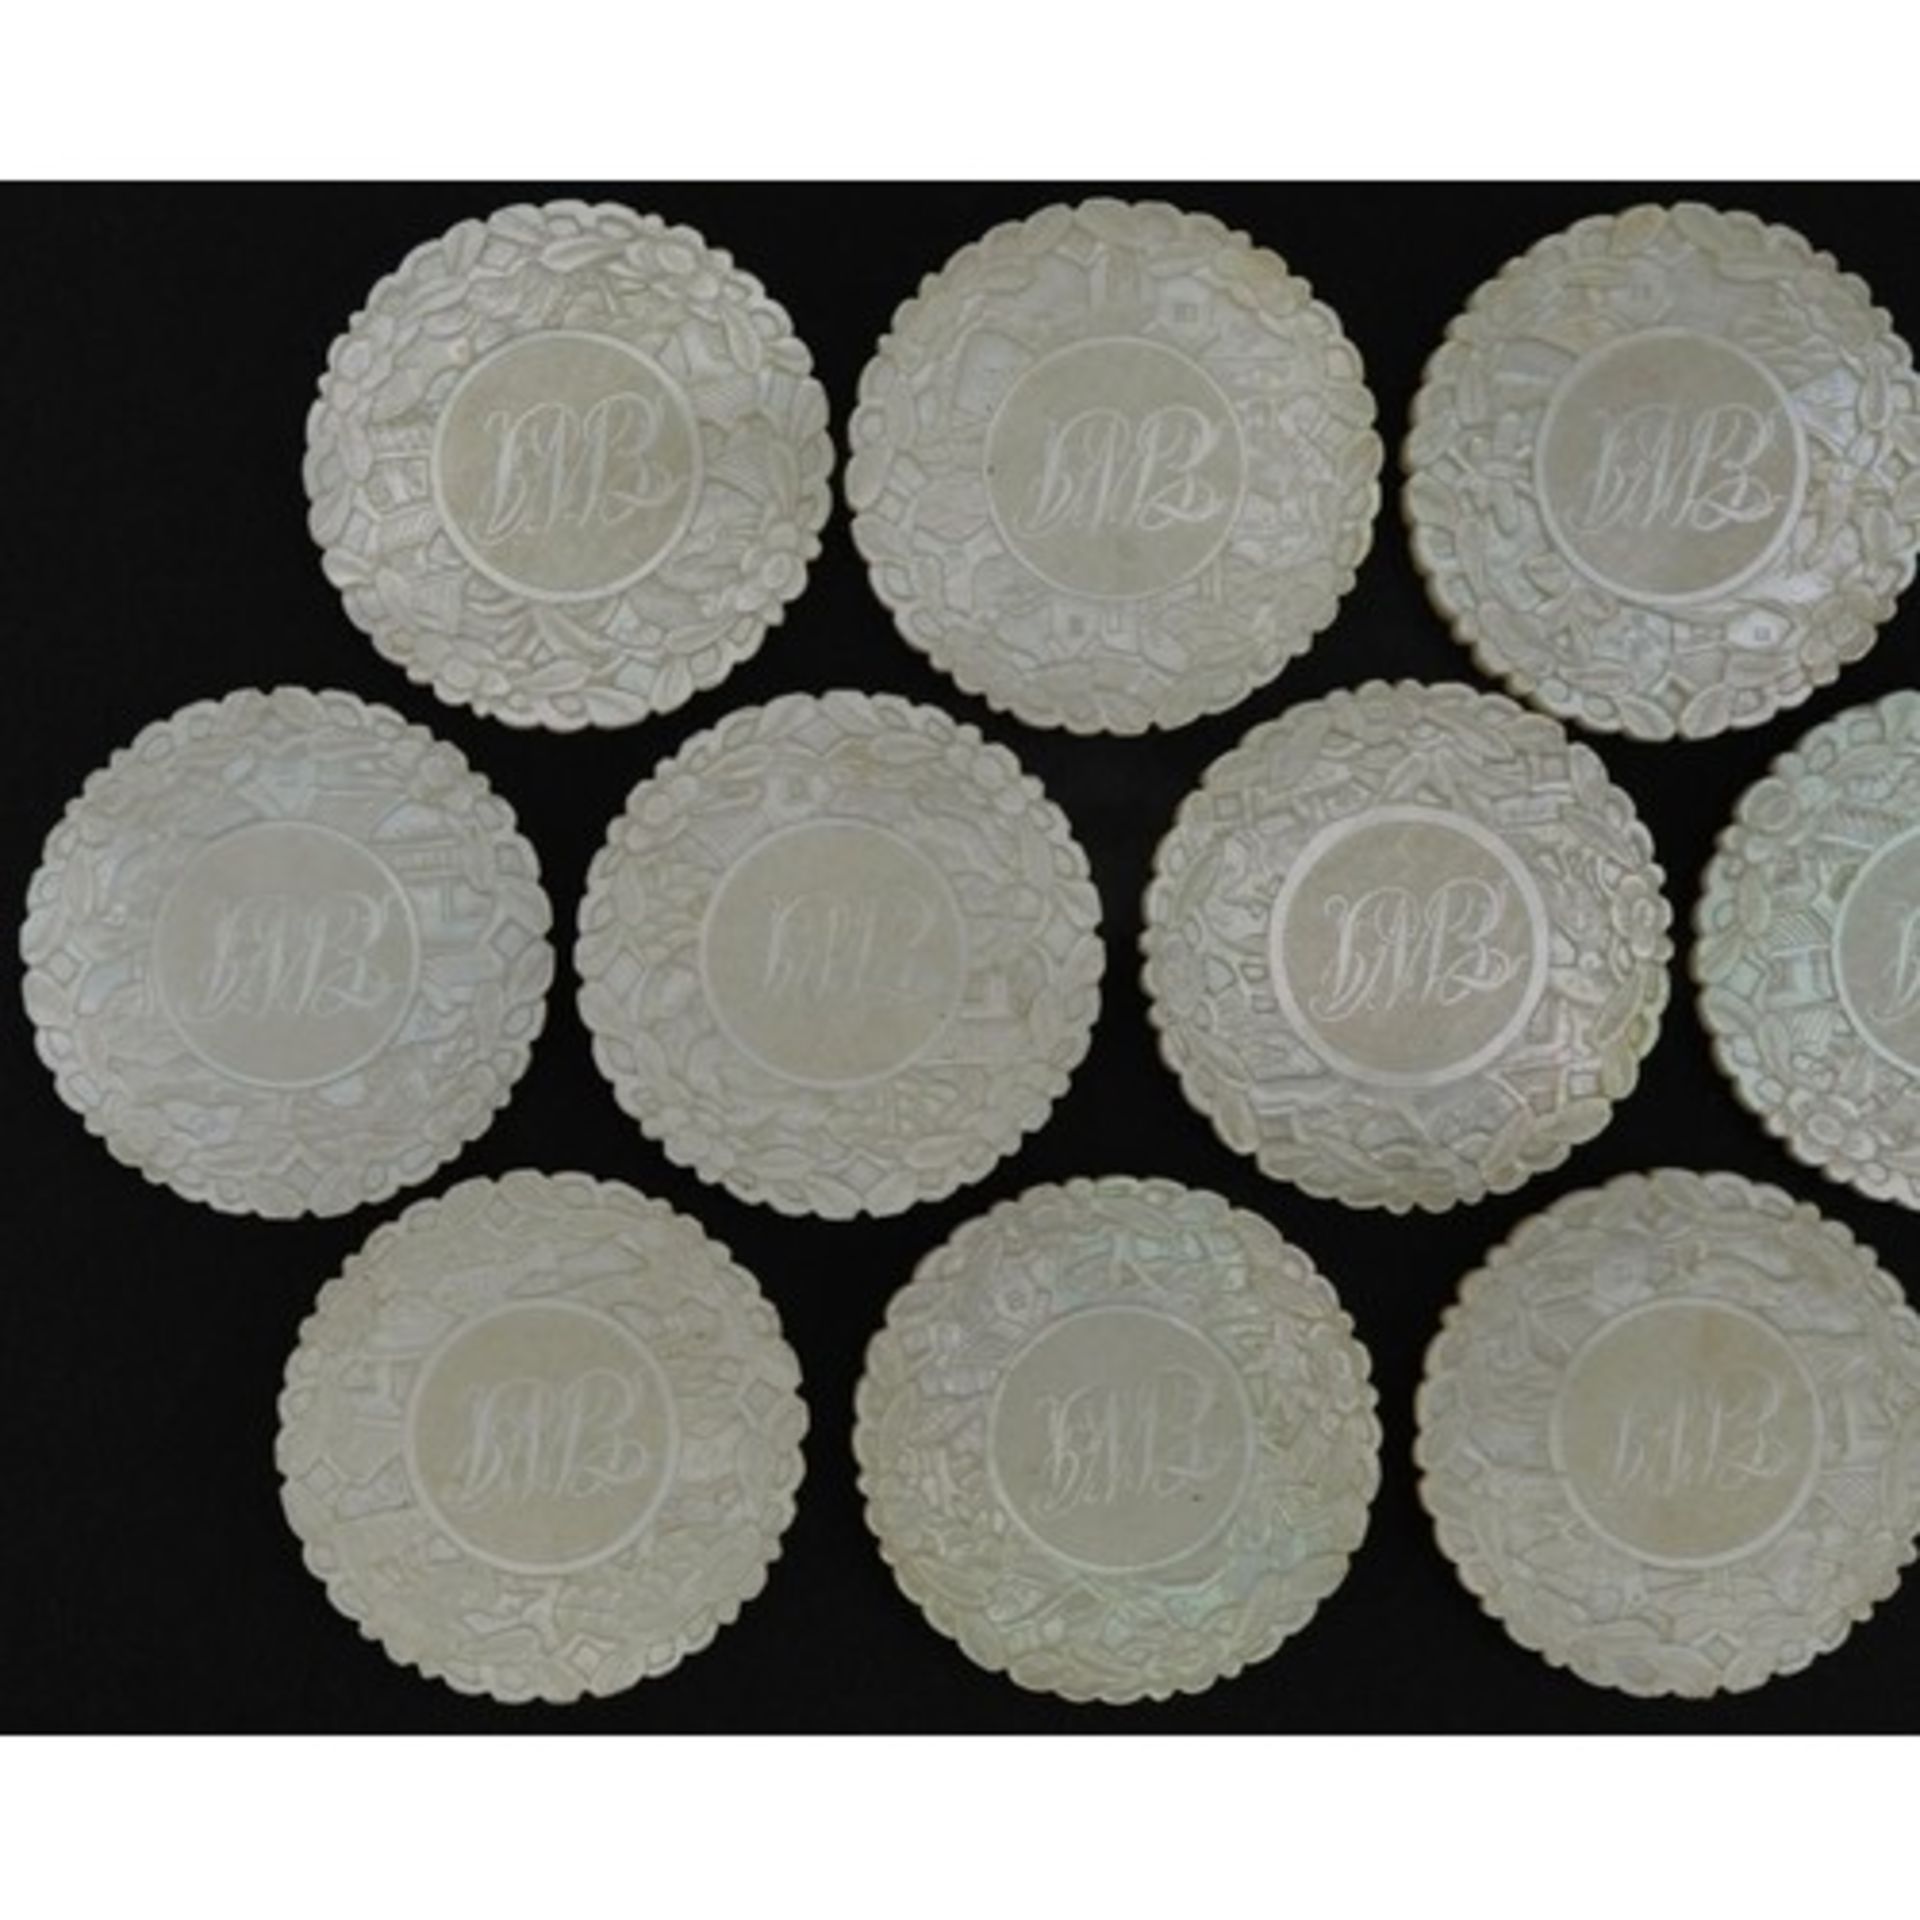 Ten good Chinese Canton mother of pearl gaming counters finely carved with figures amongst - Image 12 of 18